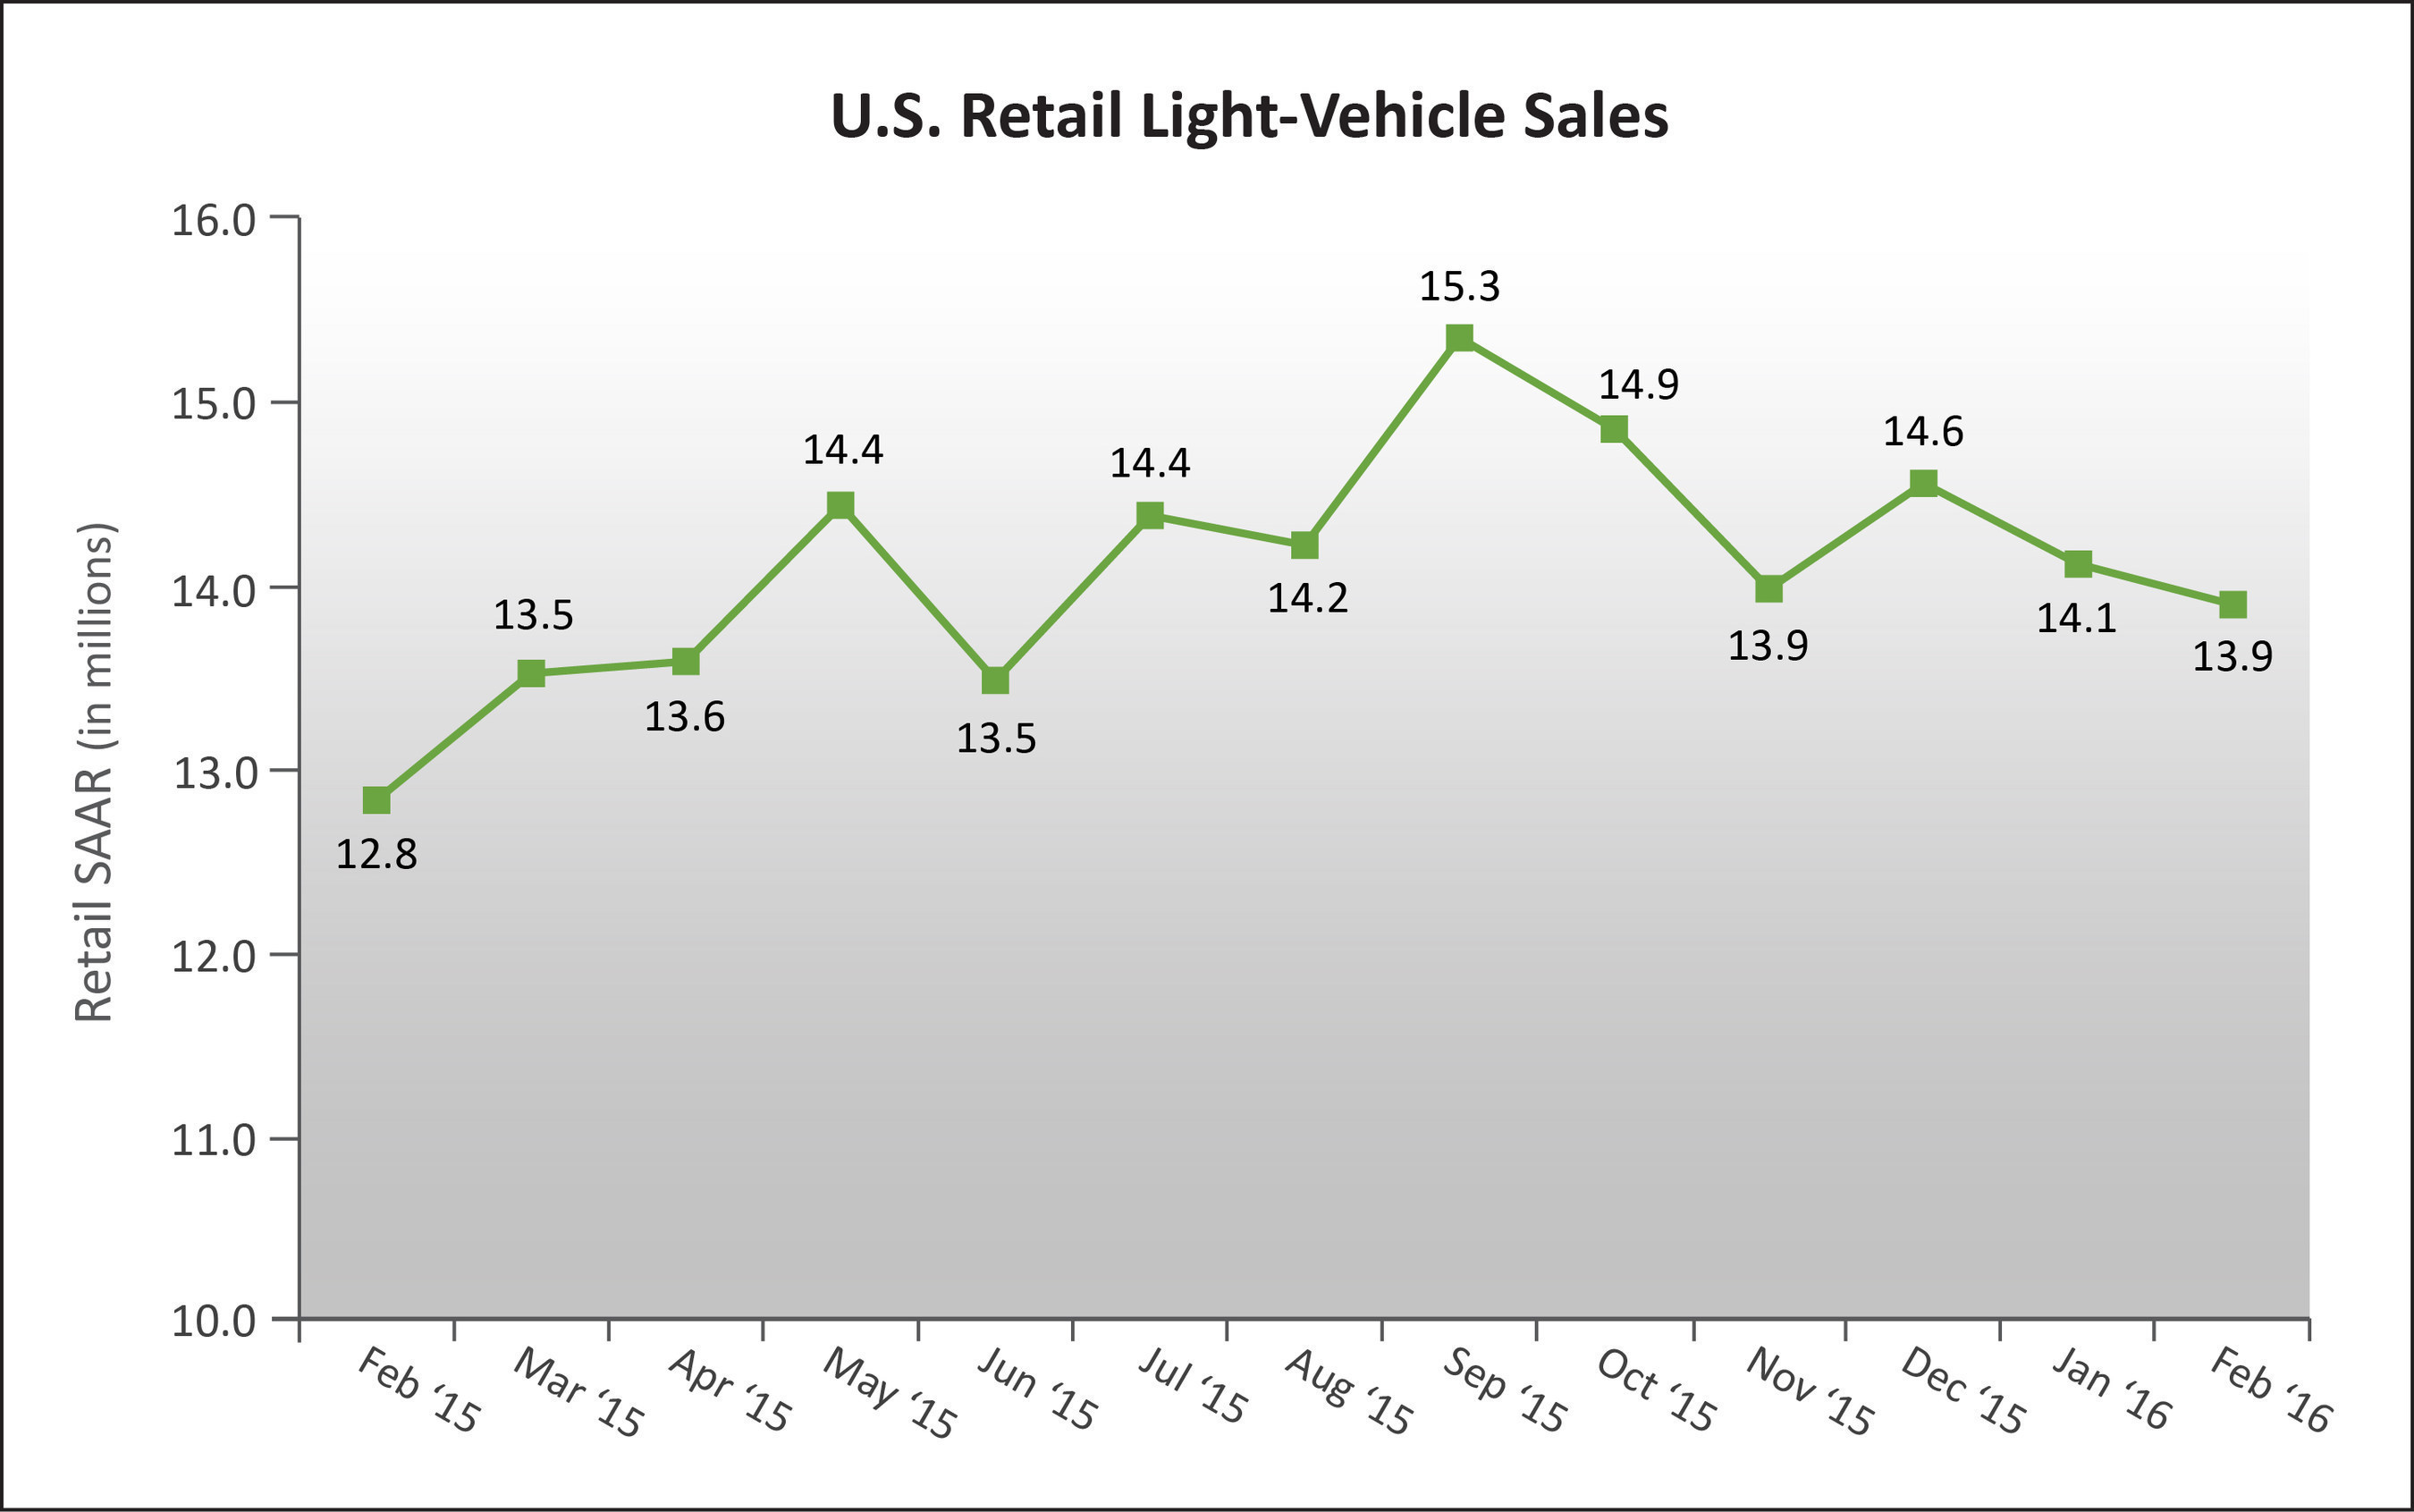 U.S. Retail SAAR--February 2015 to February 2016 (in millions of units). Source: Power Information Network (PIN) from J.D. Power.